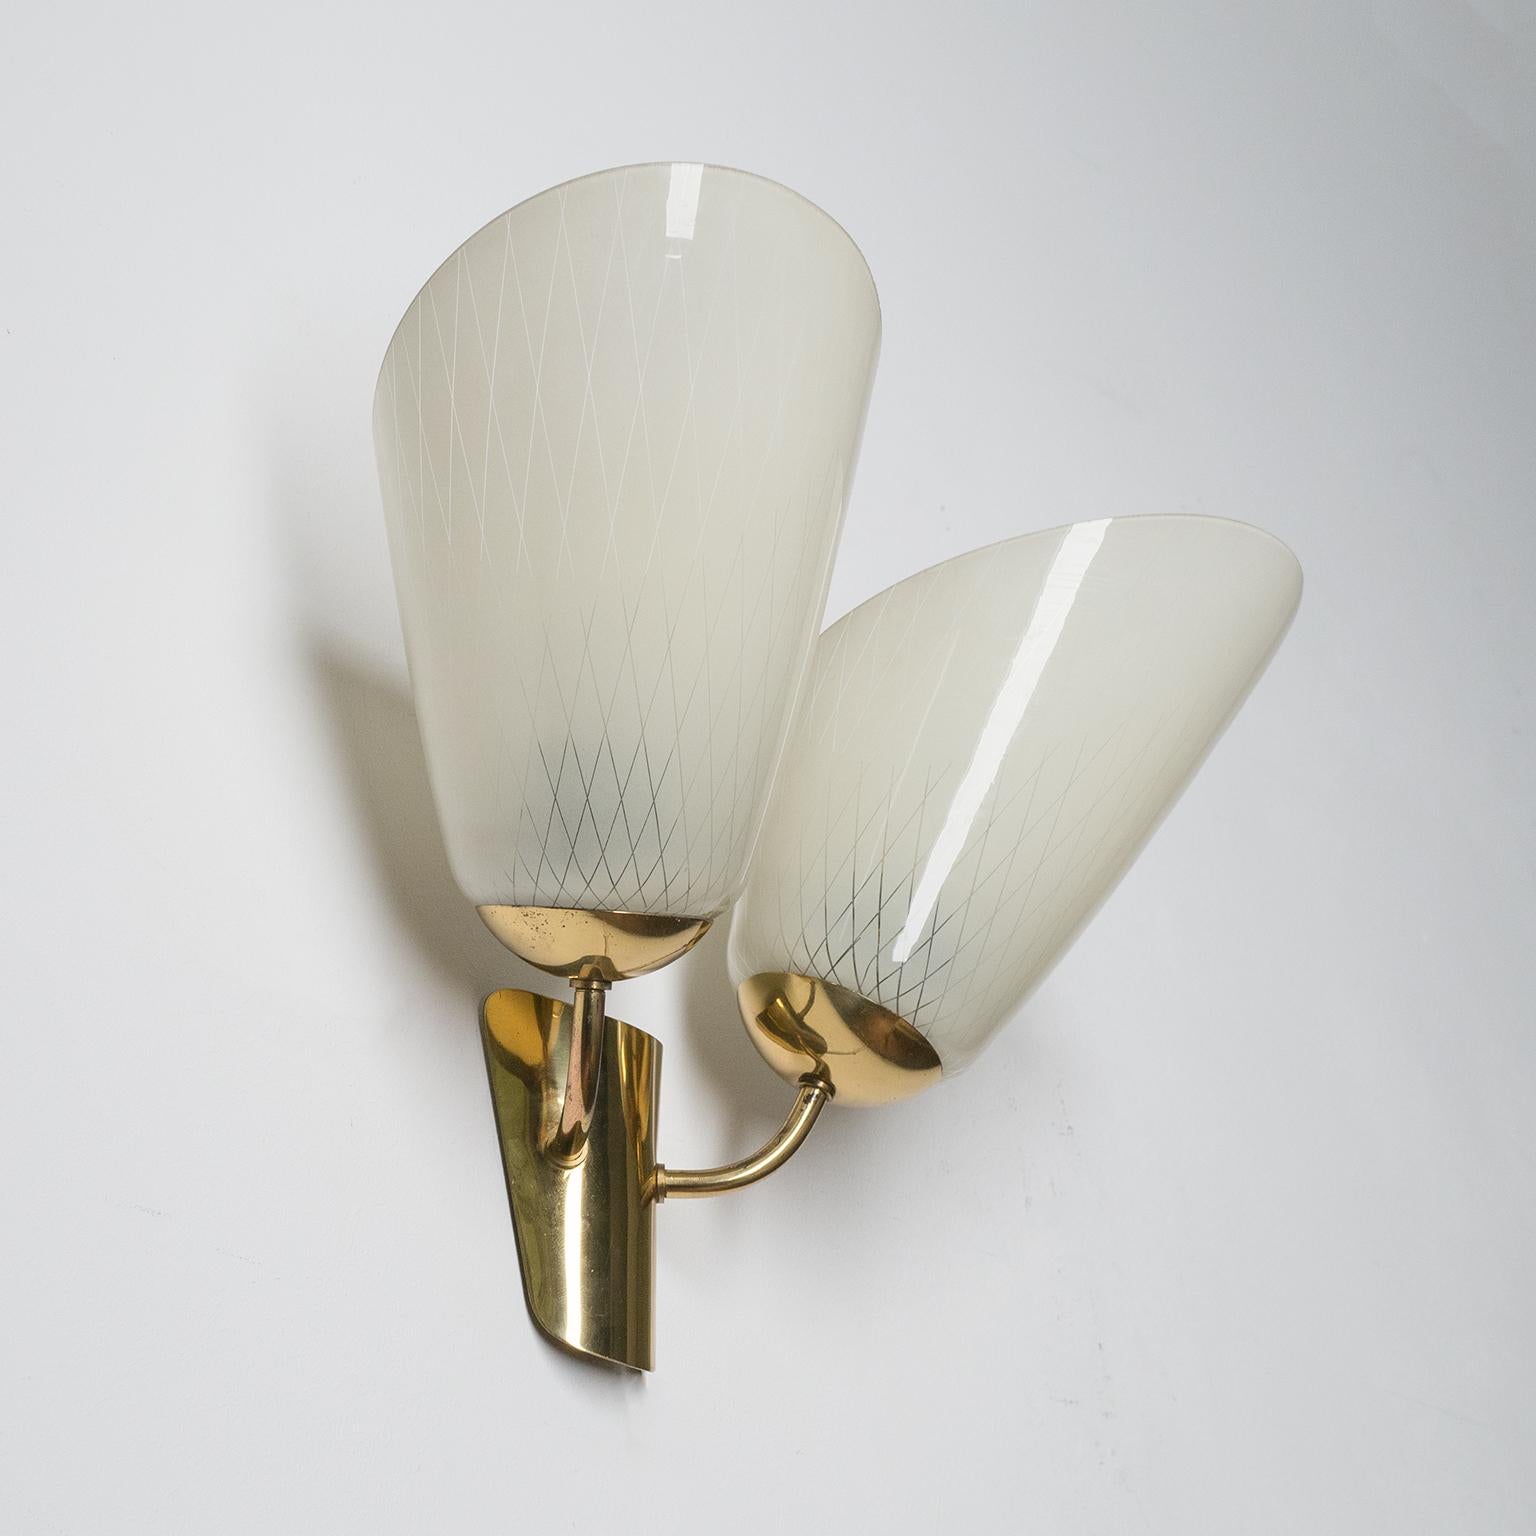 Two-Arm Wall Lamp, 1940s, Enameled Glass and Brass 4